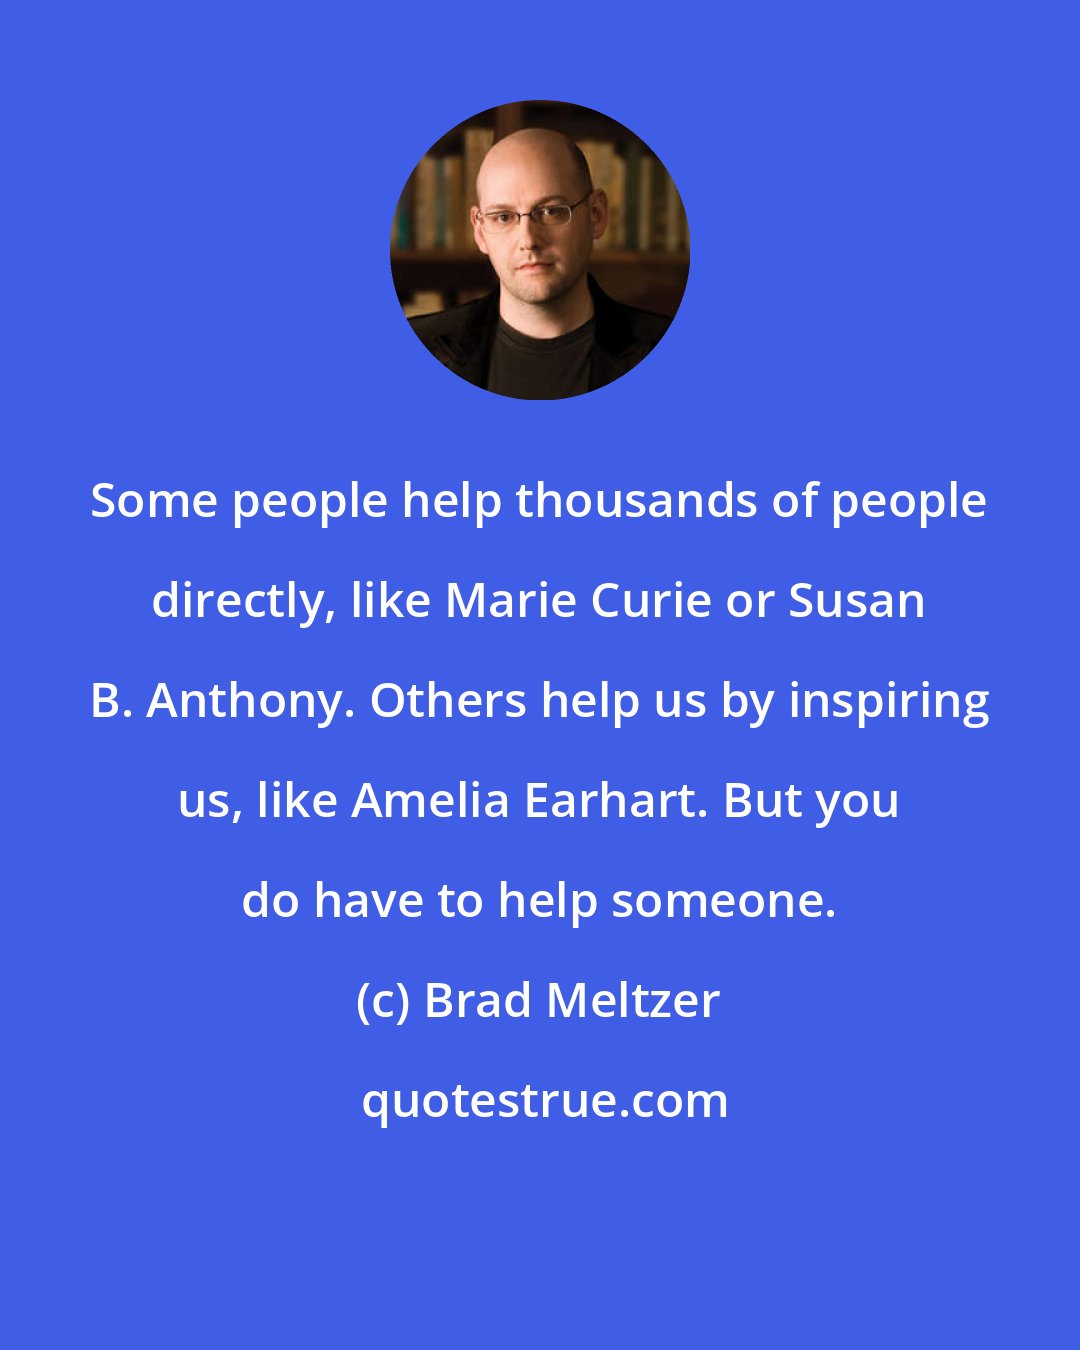 Brad Meltzer: Some people help thousands of people directly, like Marie Curie or Susan B. Anthony. Others help us by inspiring us, like Amelia Earhart. But you do have to help someone.